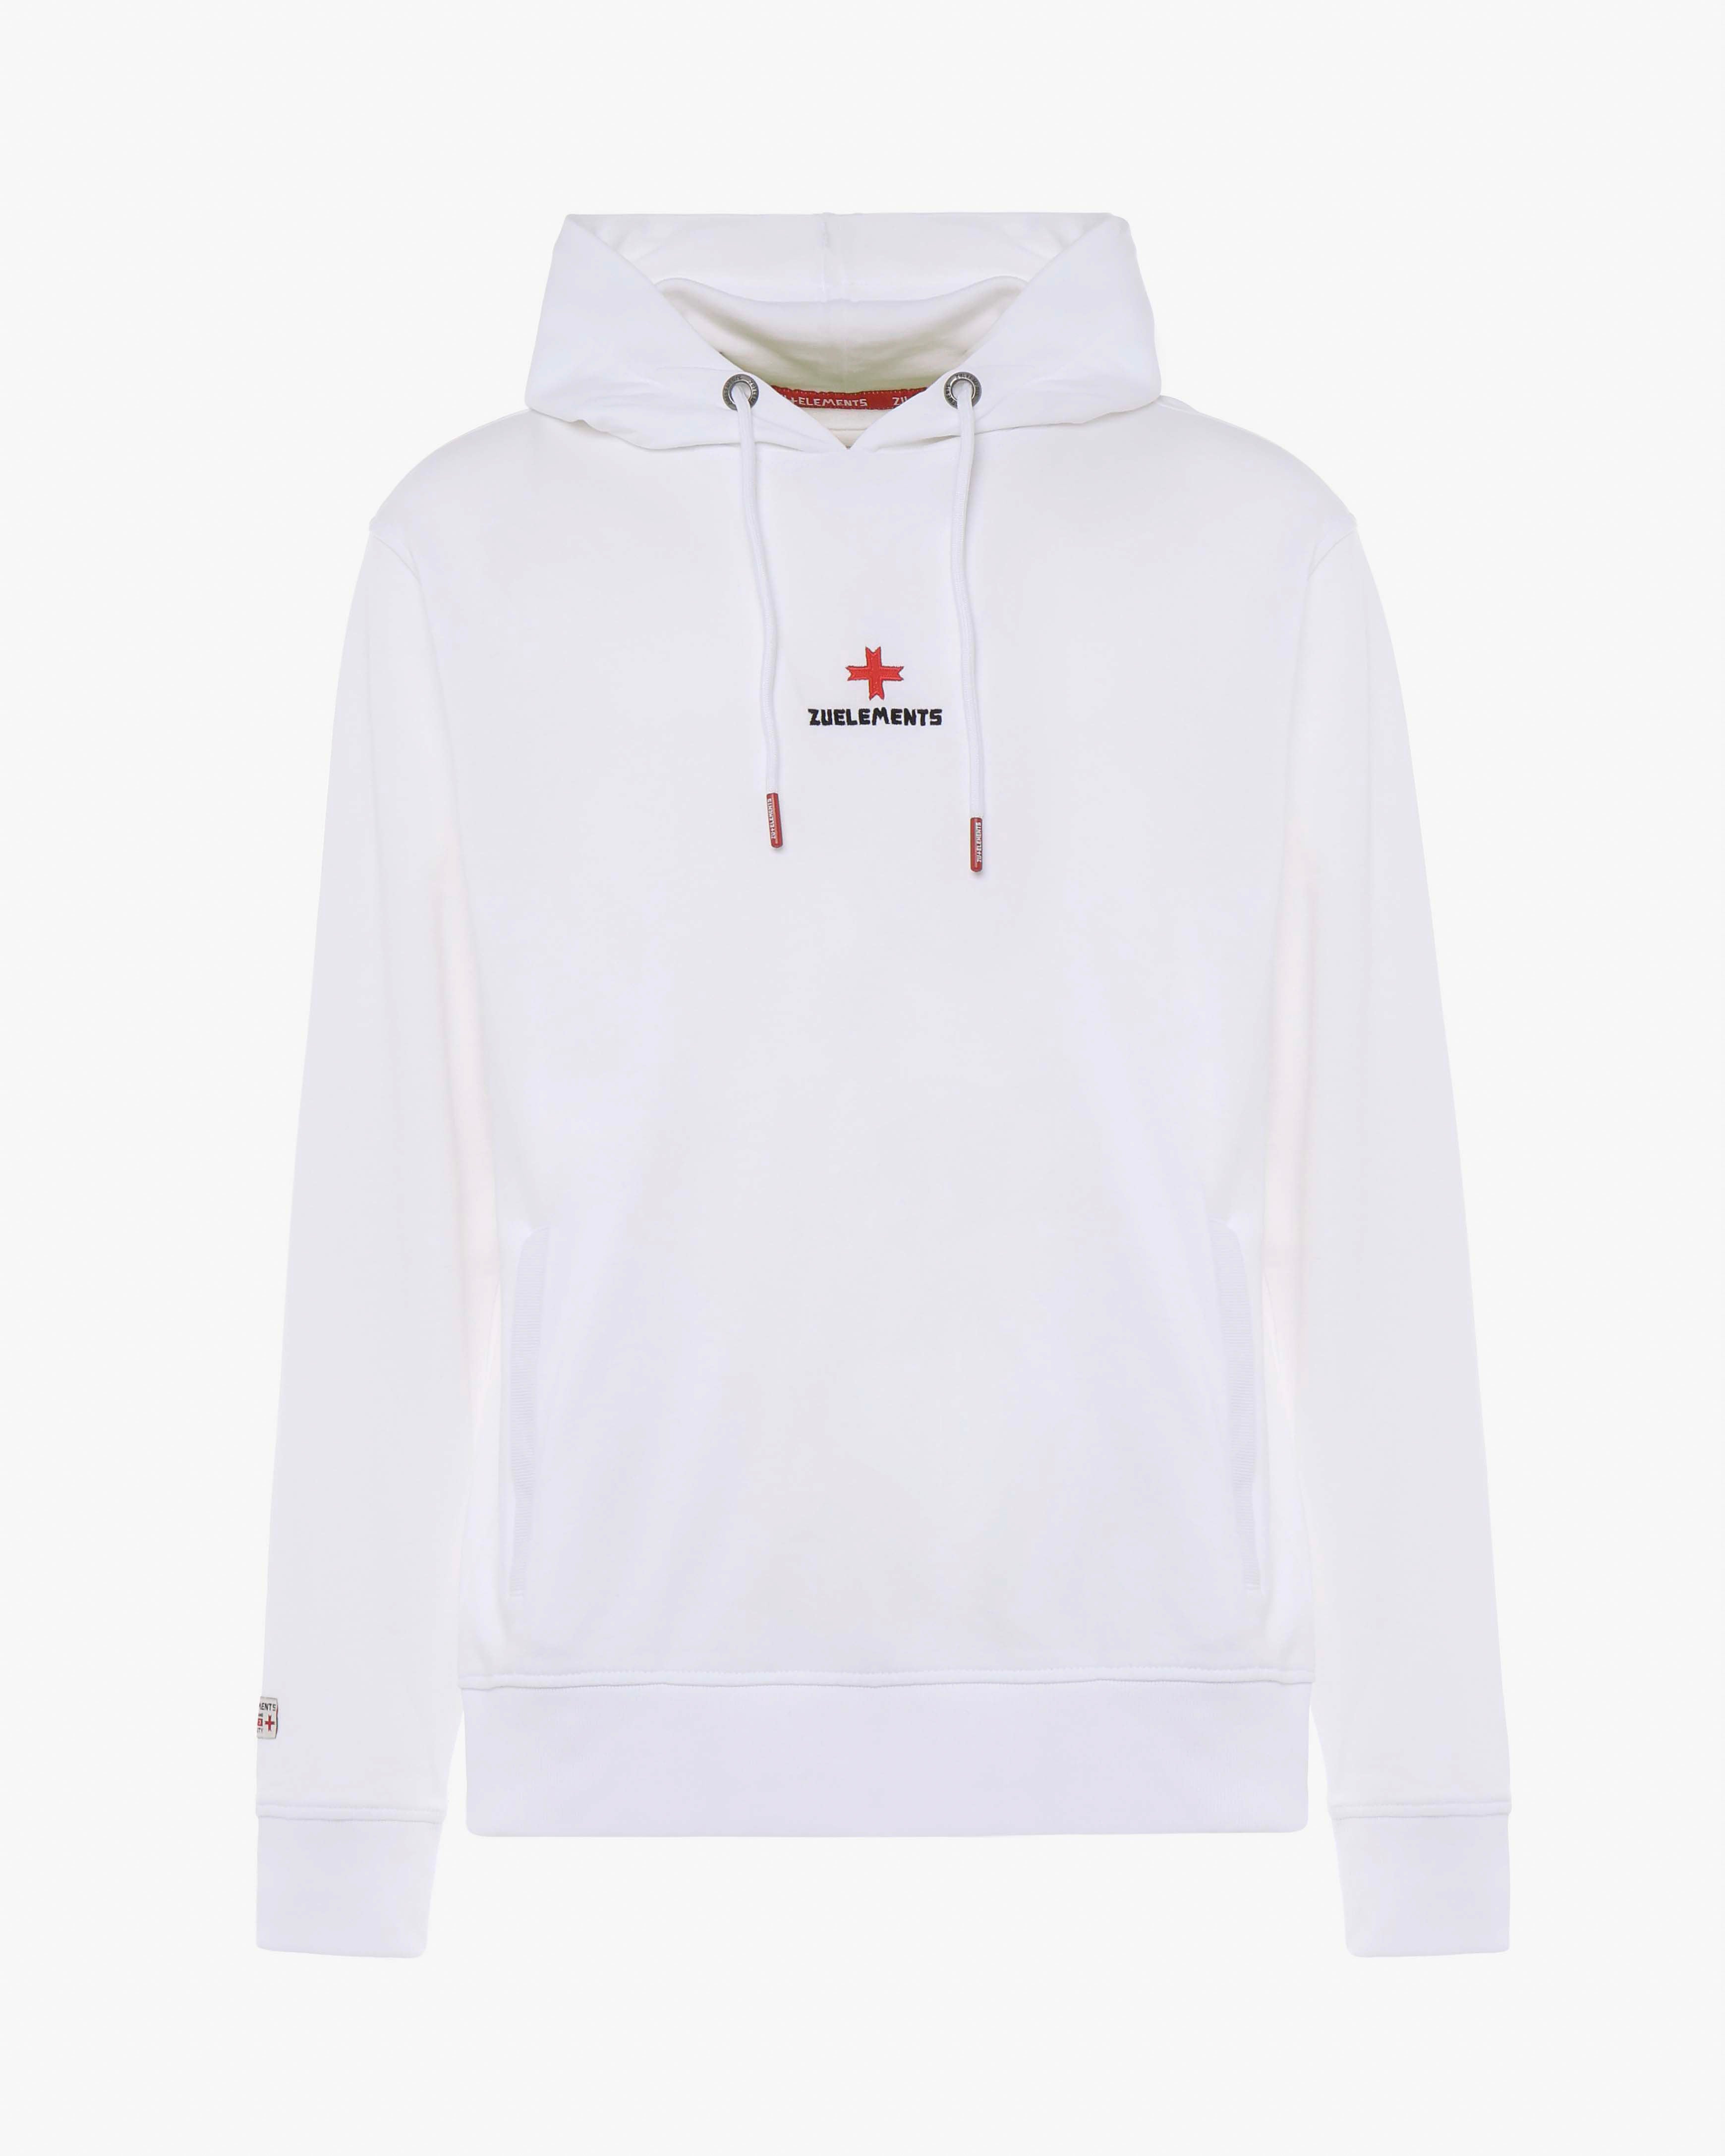 Hooded sweatshirt with embroidered logo